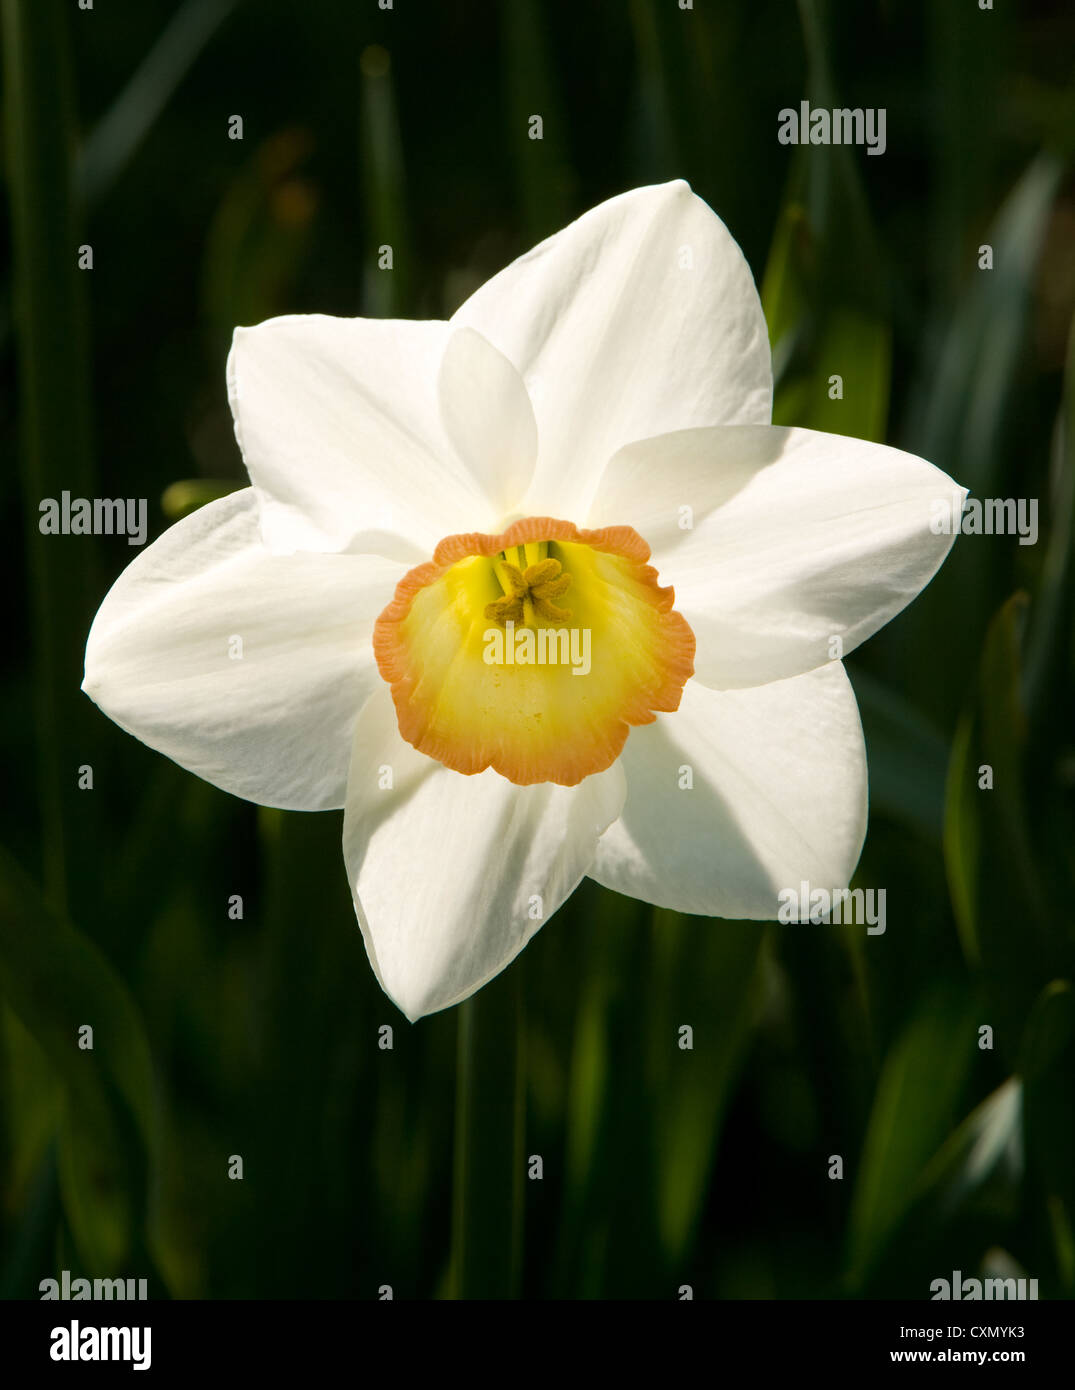 Flower head of a beautiful white narcissus daffodil with an orange trumpet centre Stock Photo